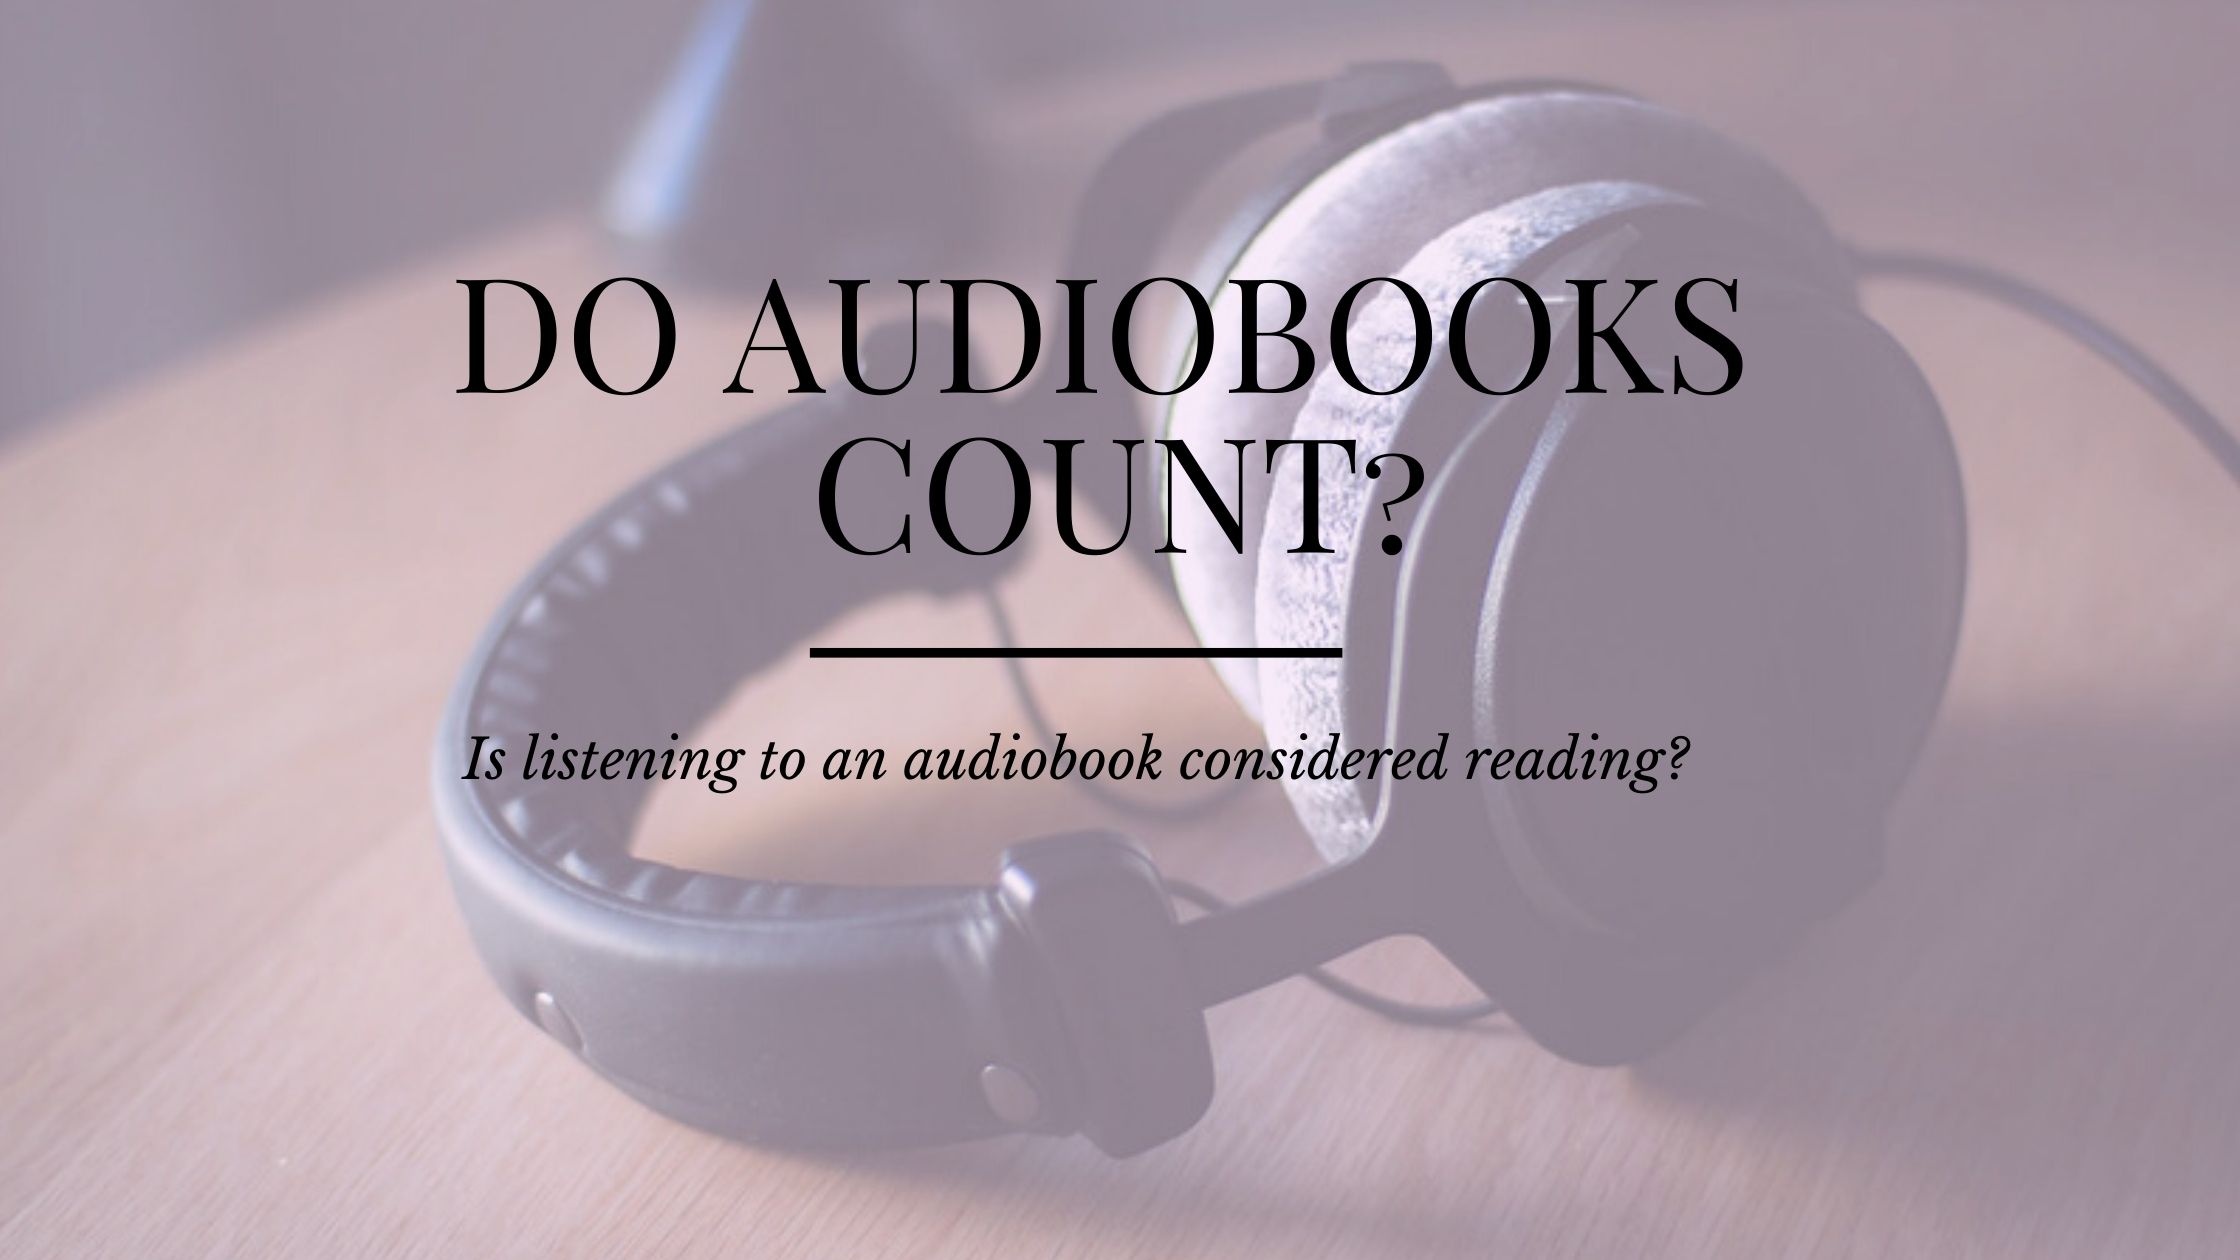 Does audiobook count as reading?